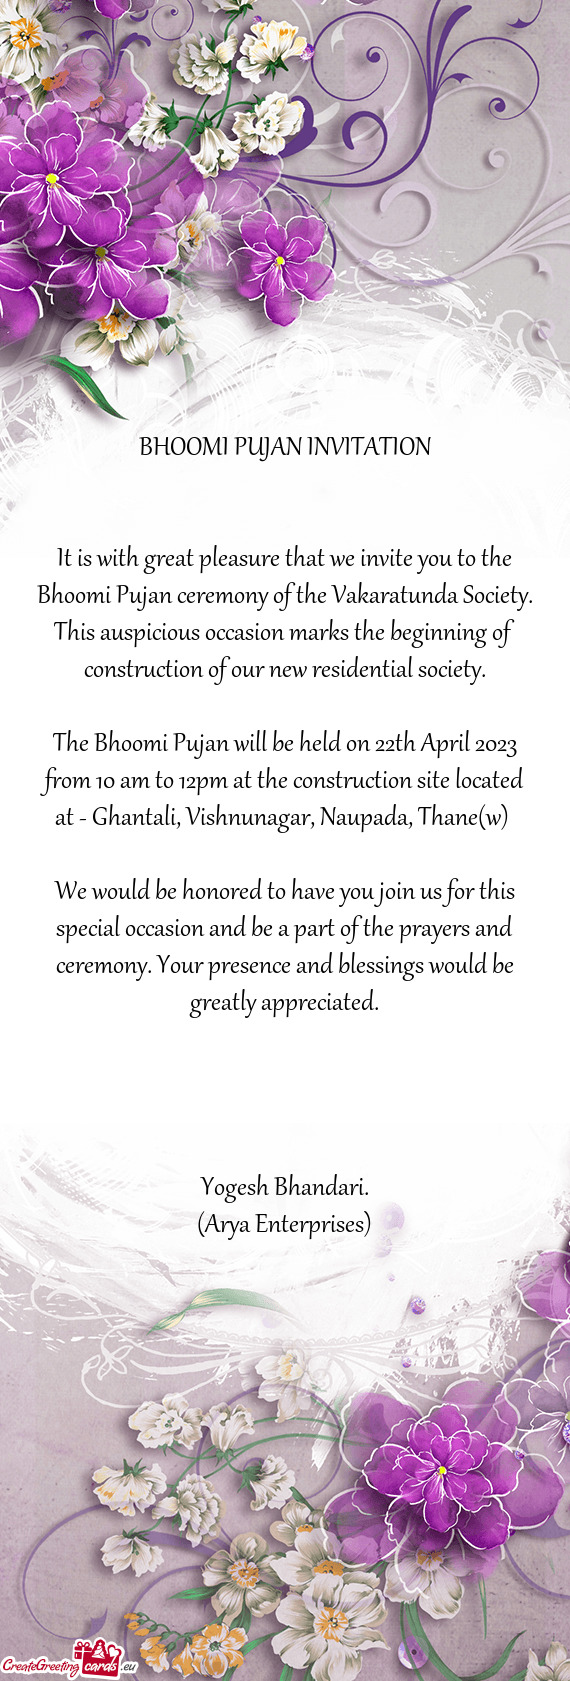 It is with great pleasure that we invite you to the Bhoomi Pujan ceremony of the Vakaratunda Society